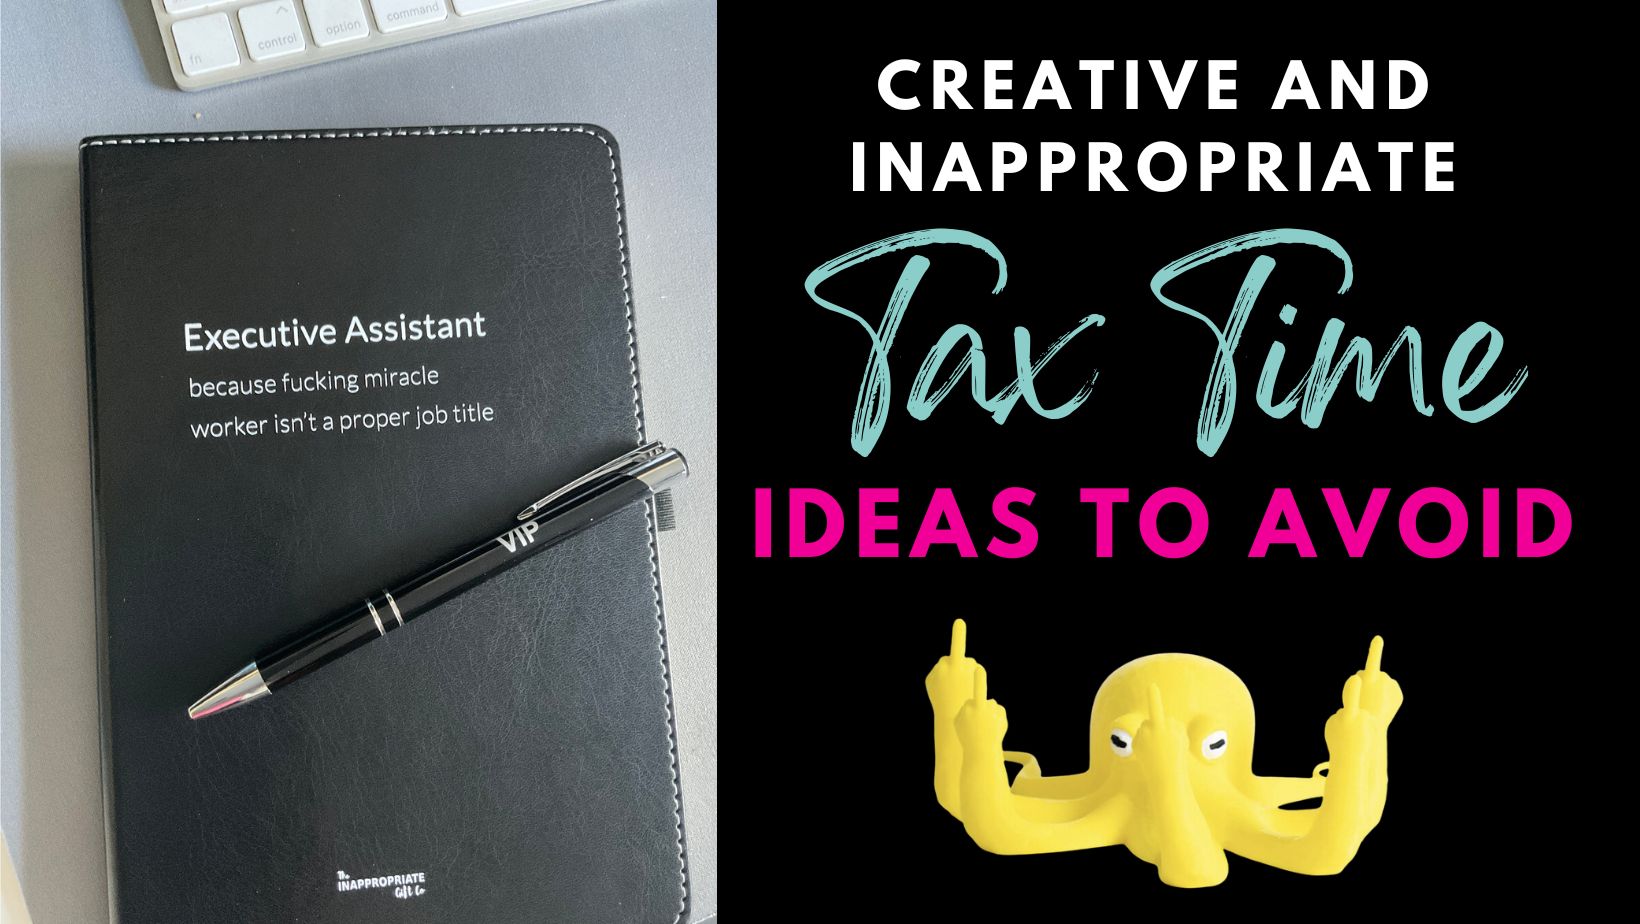 Creative and Inappropriate Tax Time Ideas to Avoid